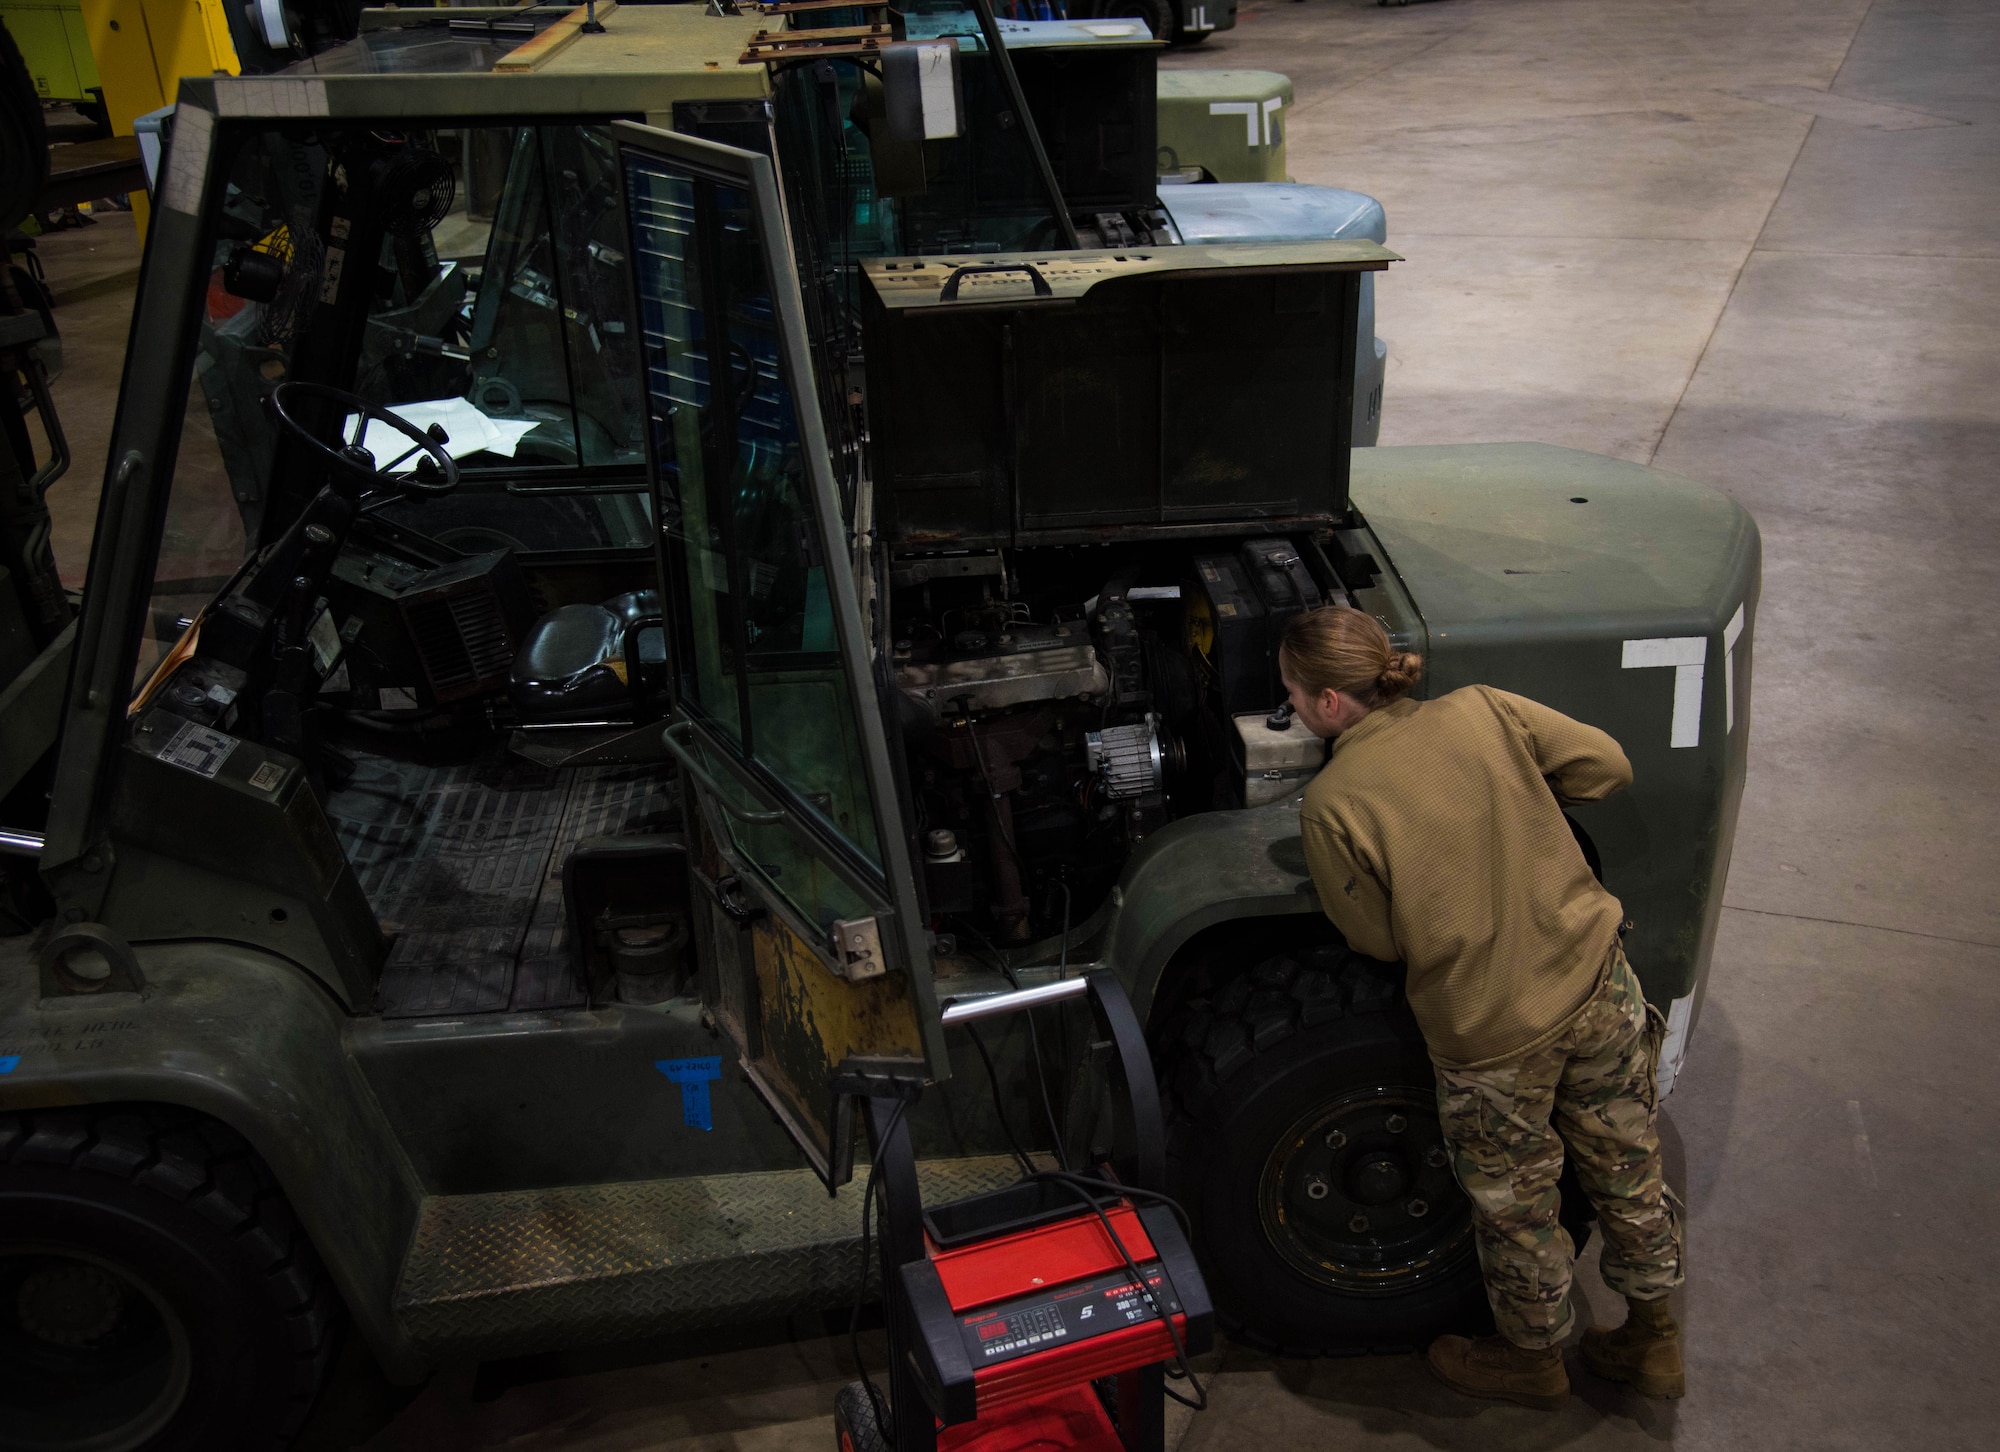 Vehicle maintainer looks at forklift.